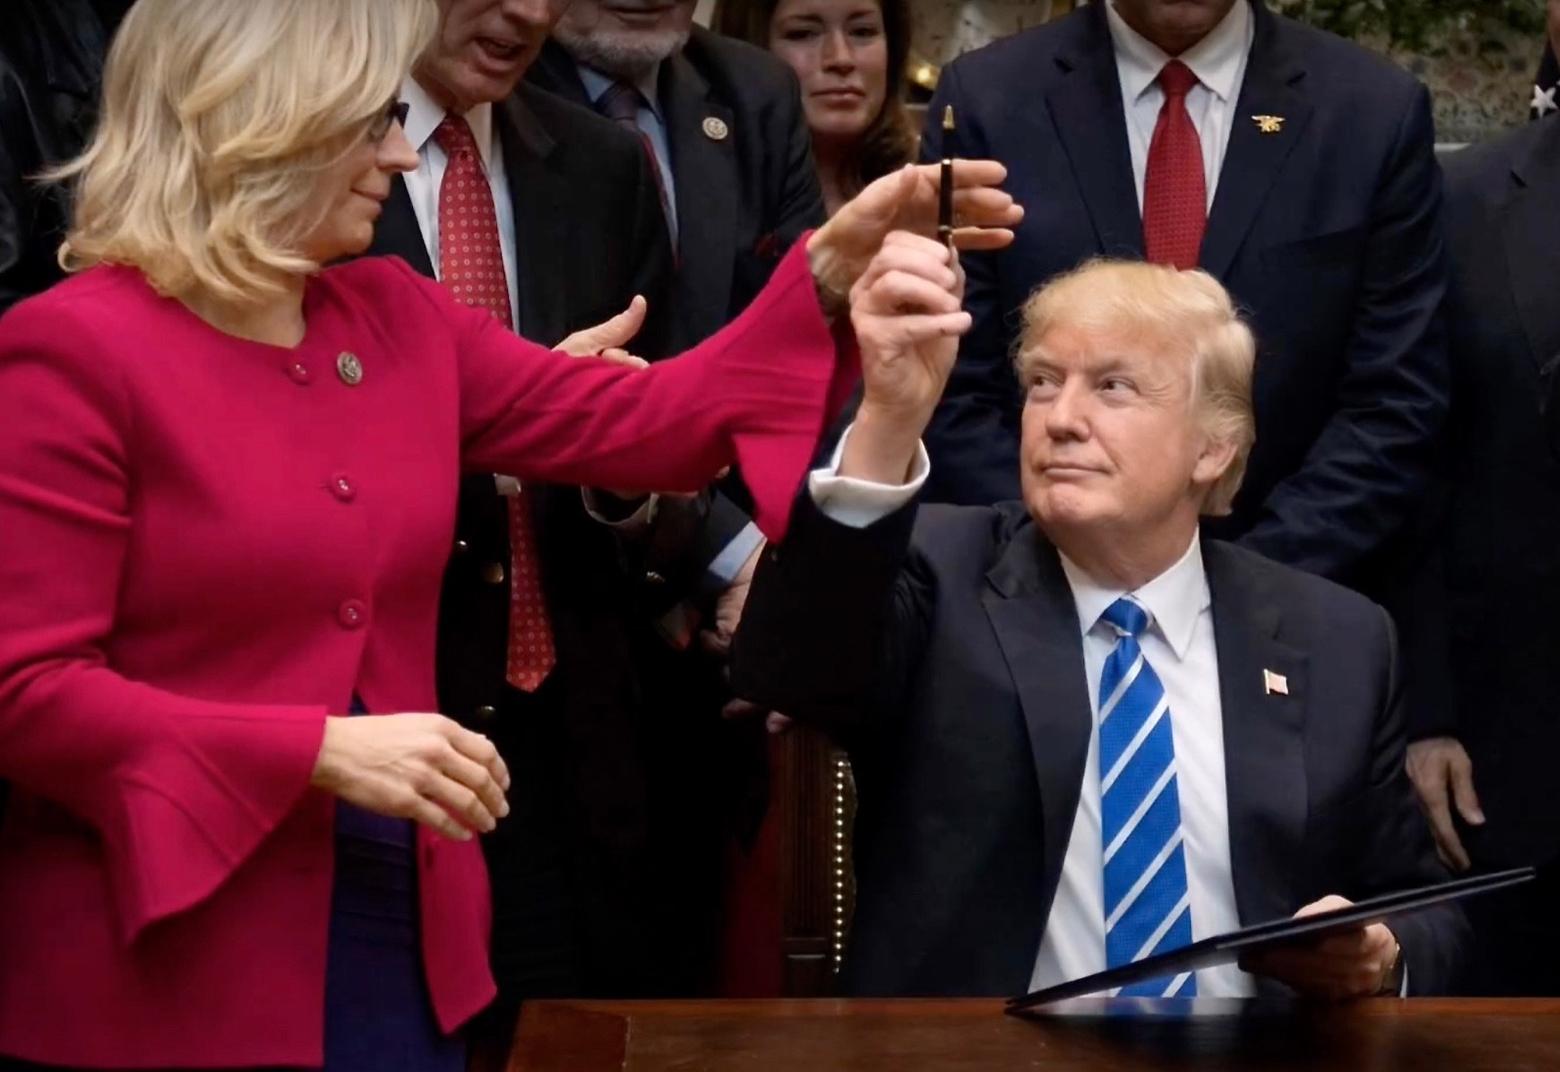 US Rep. Liz Cheney of Wyoming at a bill-signing event in The White House with President Donald Trump in 2017.  Photo courtesy whitehouse.gov/flckr